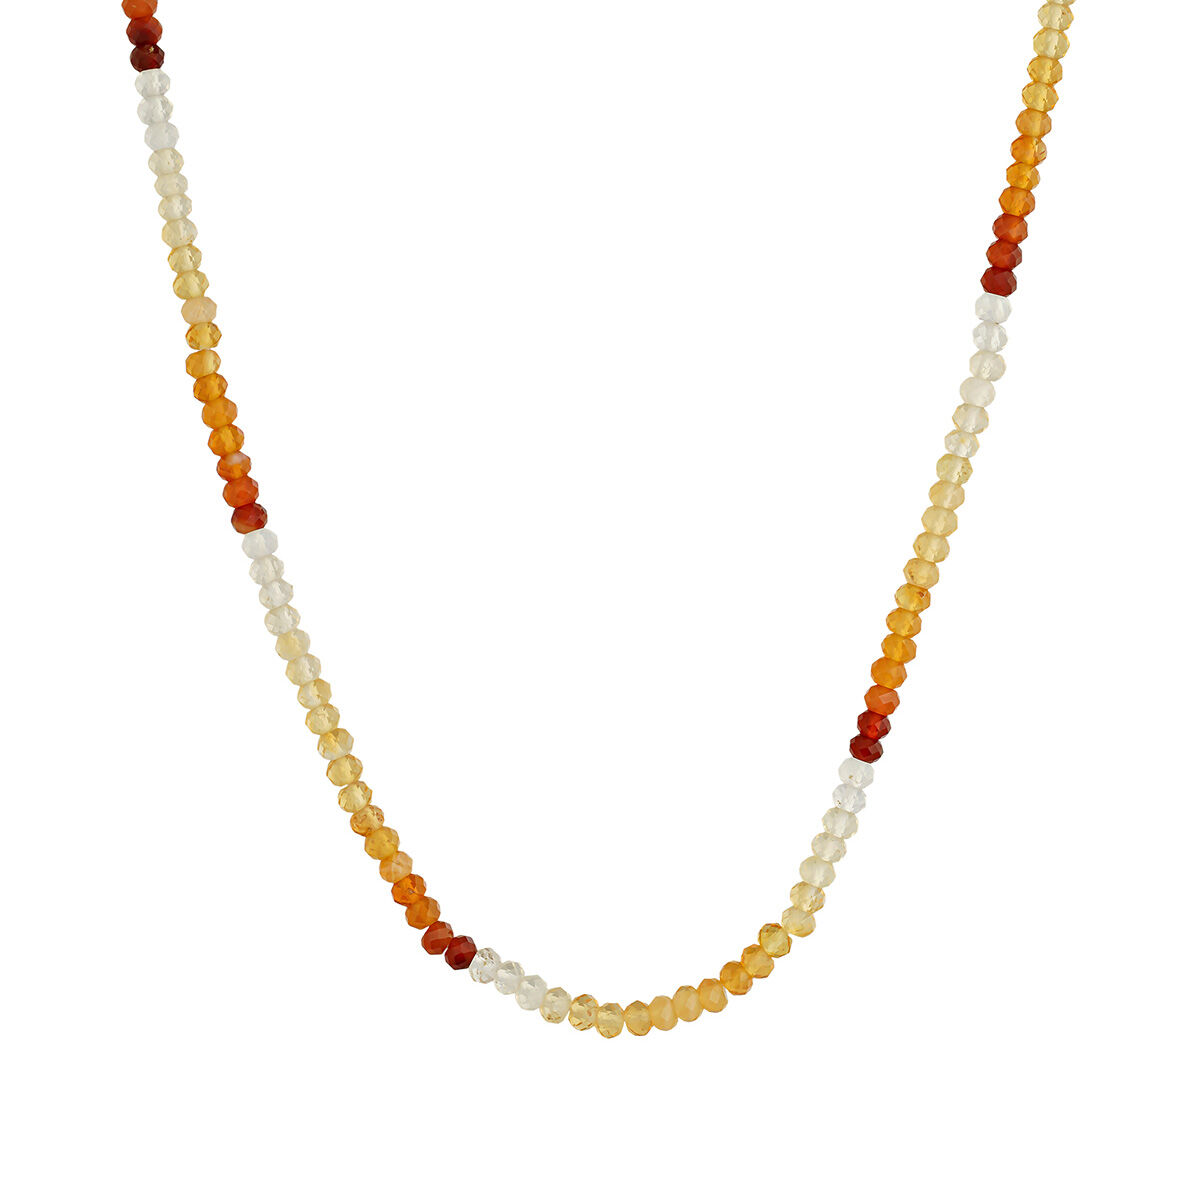 Necklace in 18k yellow gold-plated silver with multicoloured opal beads, J04922-02-MOP, hi-res